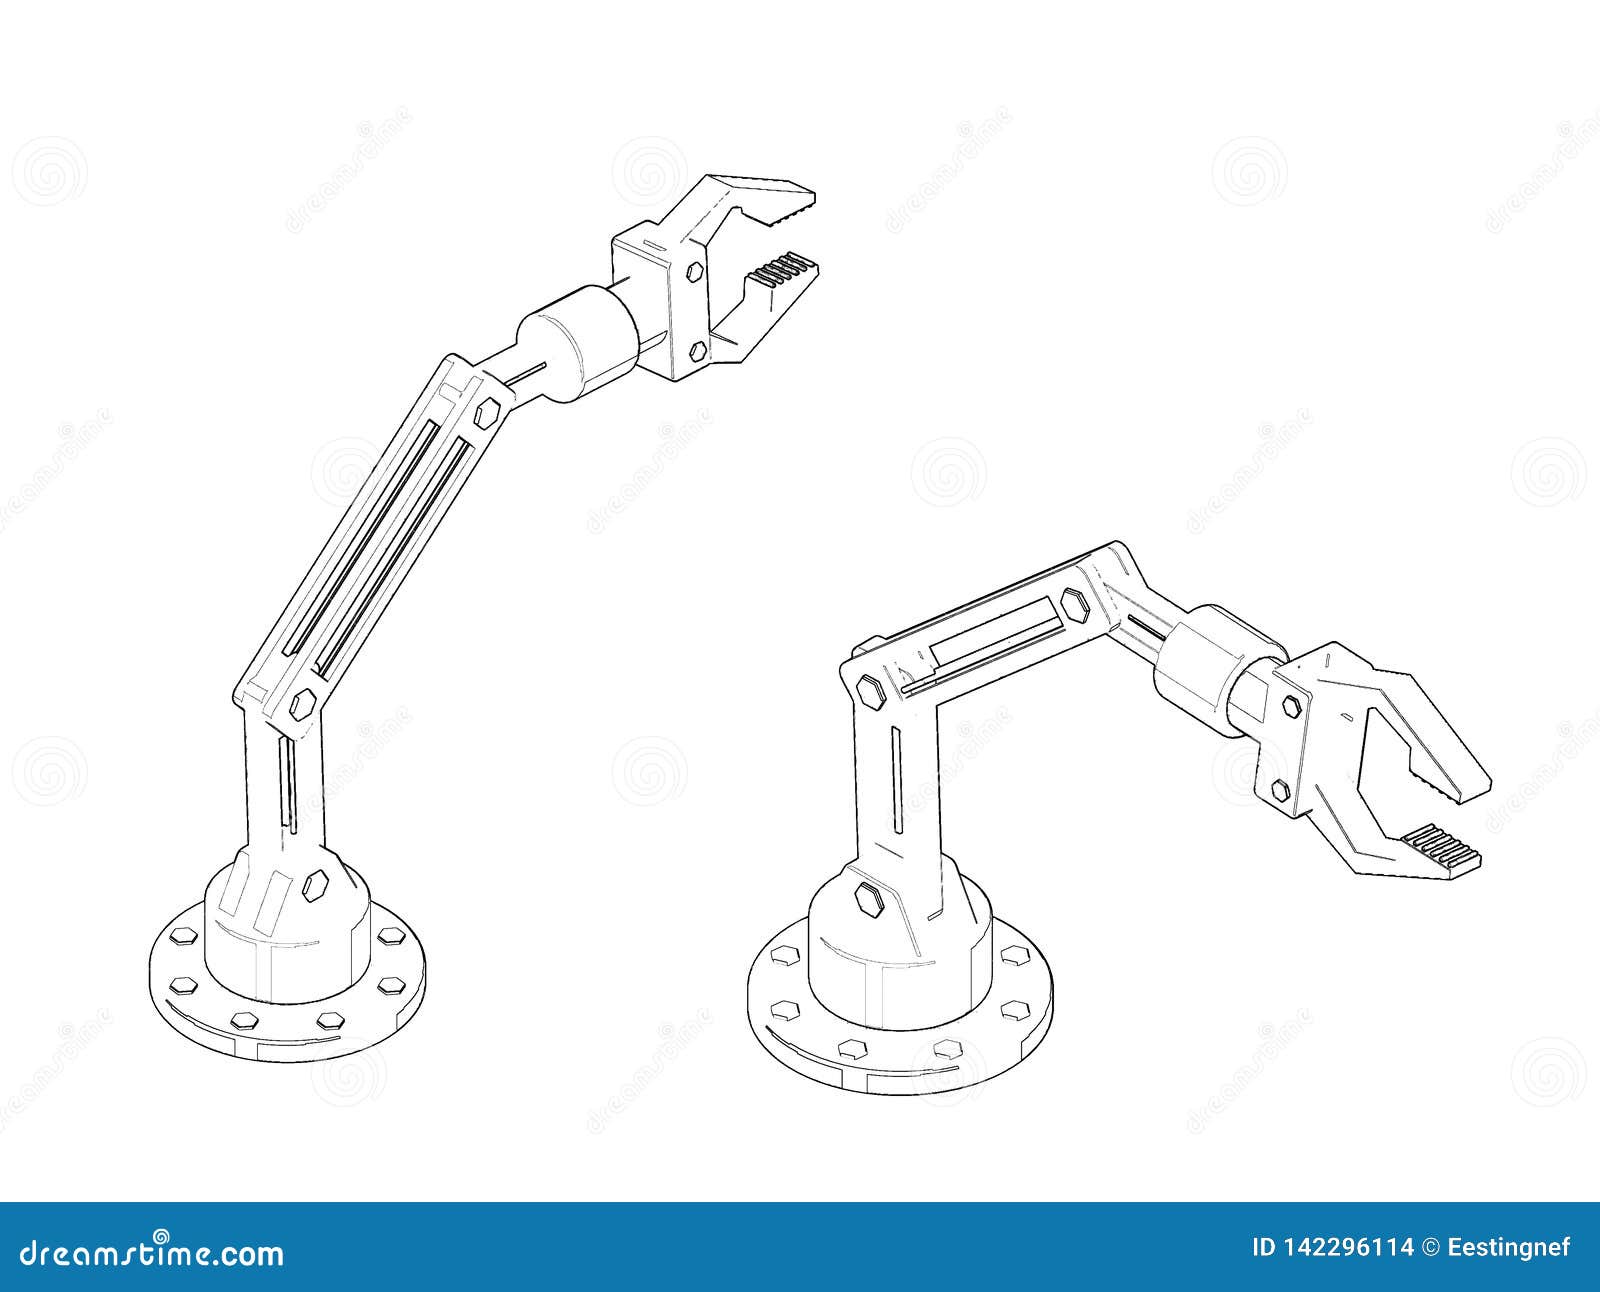 Robotic Arm. Isolated On White Background. Sketch Illustration Stock